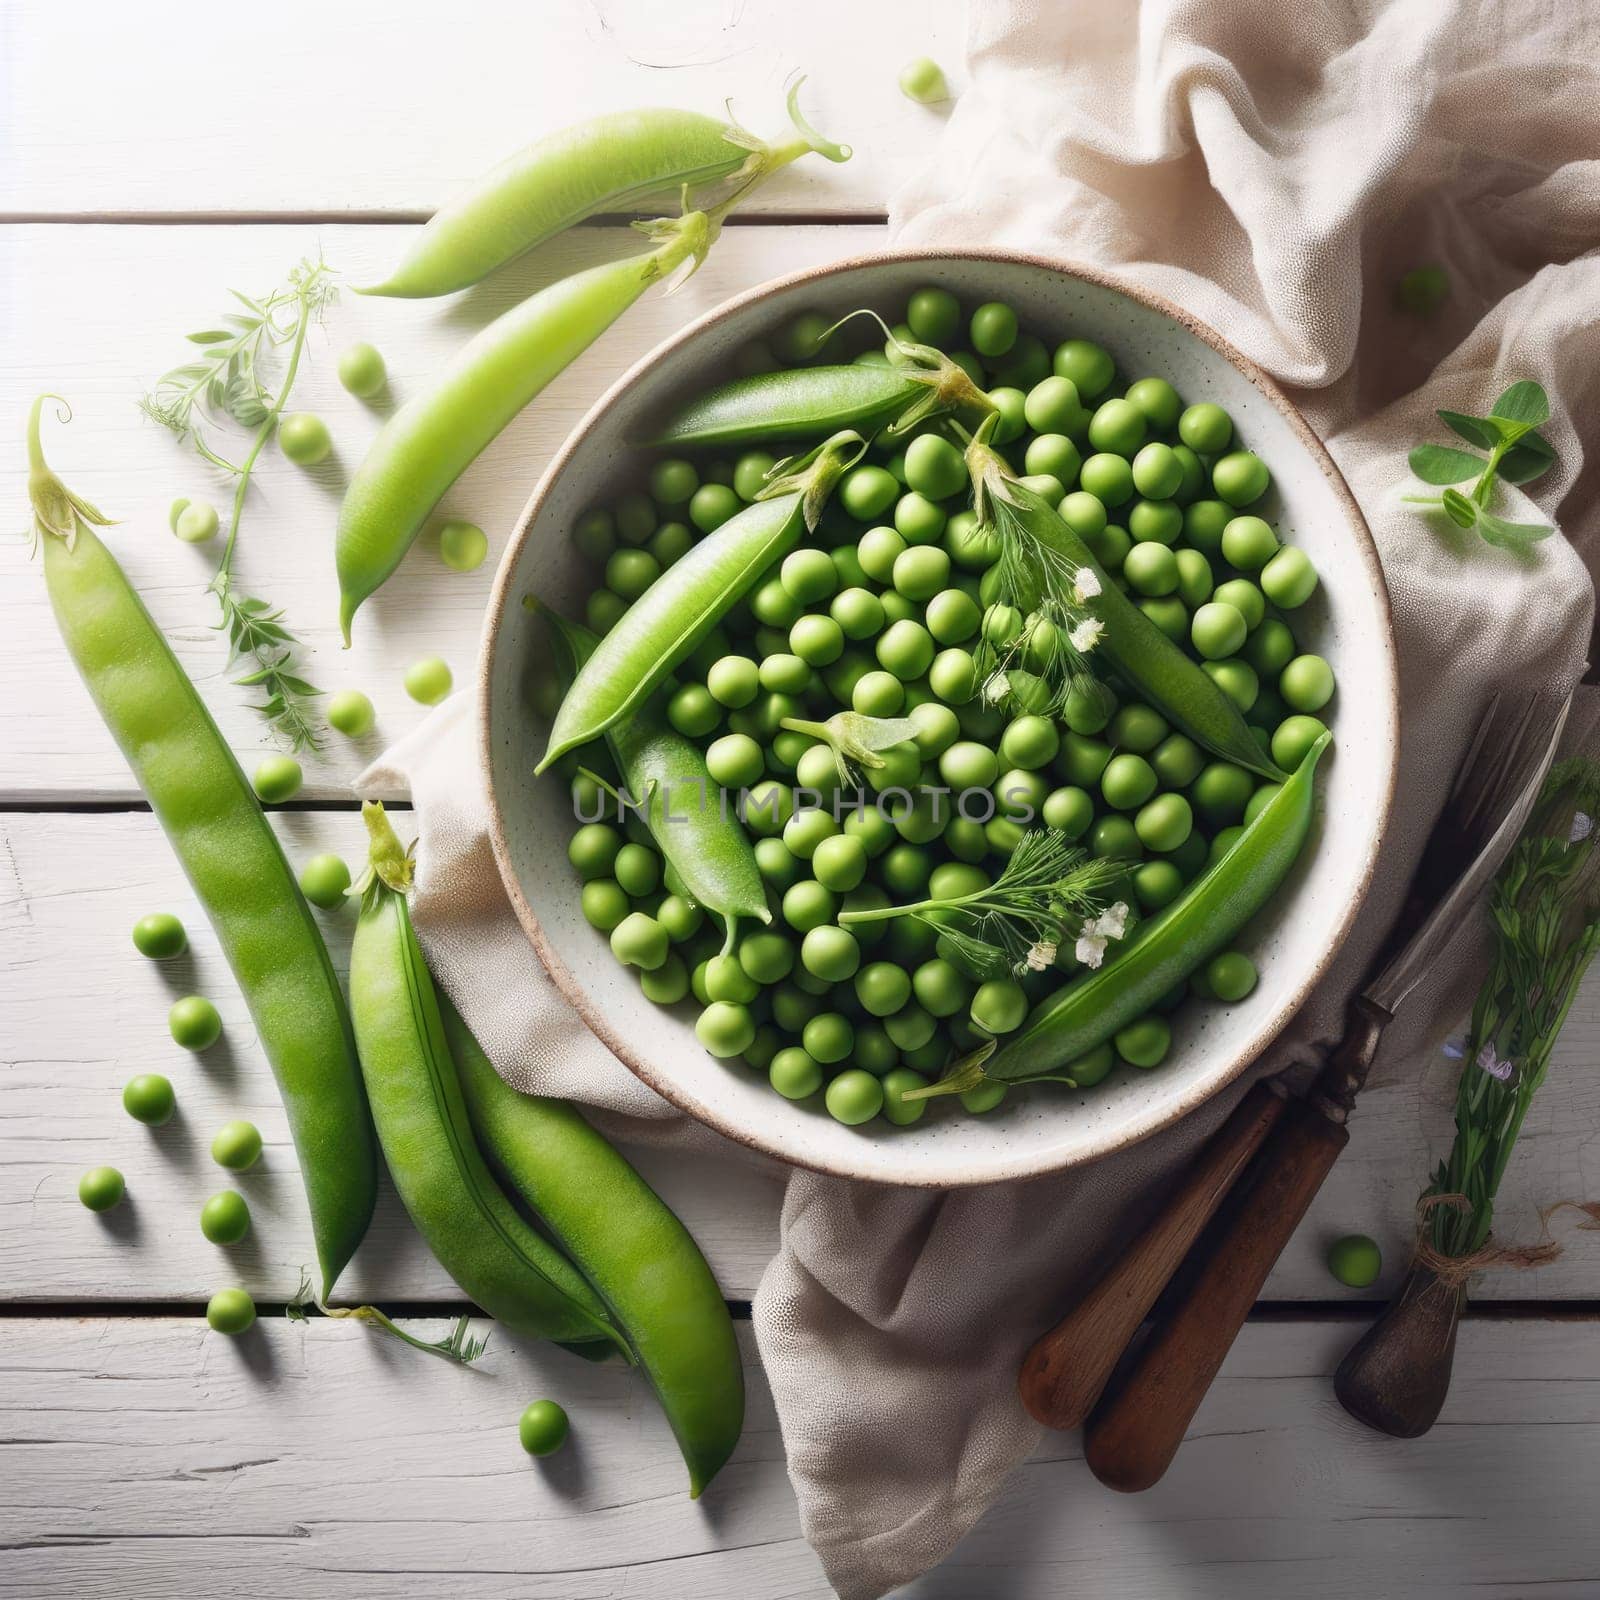 Fresh green peas in bowl with pods and leaves on white wooden table, healthy green vegetable or legume.